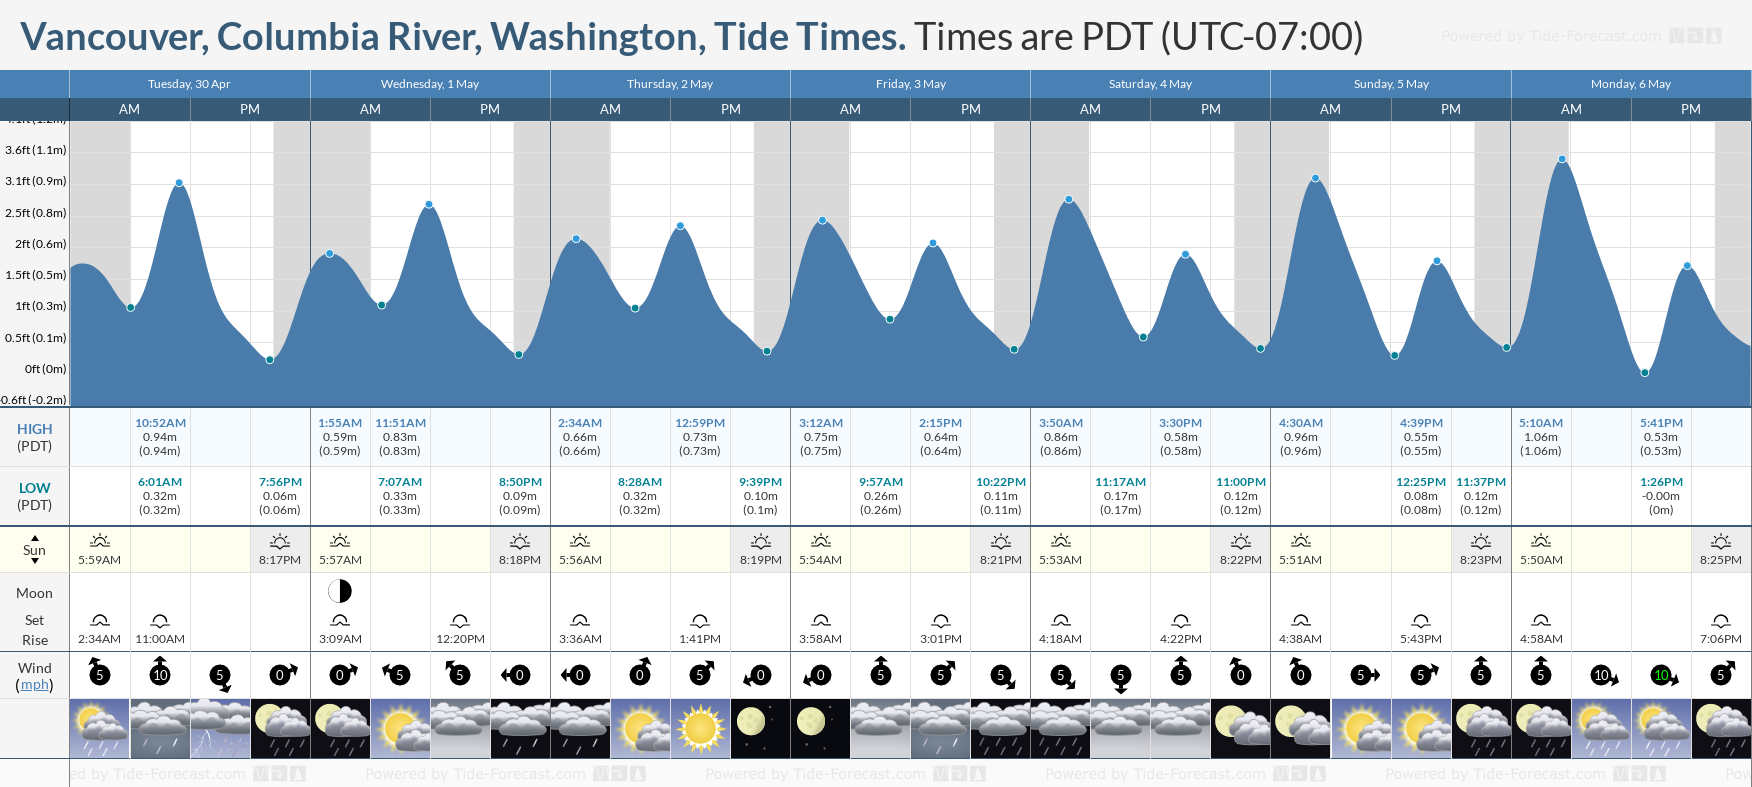 Vancouver, Columbia River, Washington Tide Chart including high and low tide tide times for the next 7 days